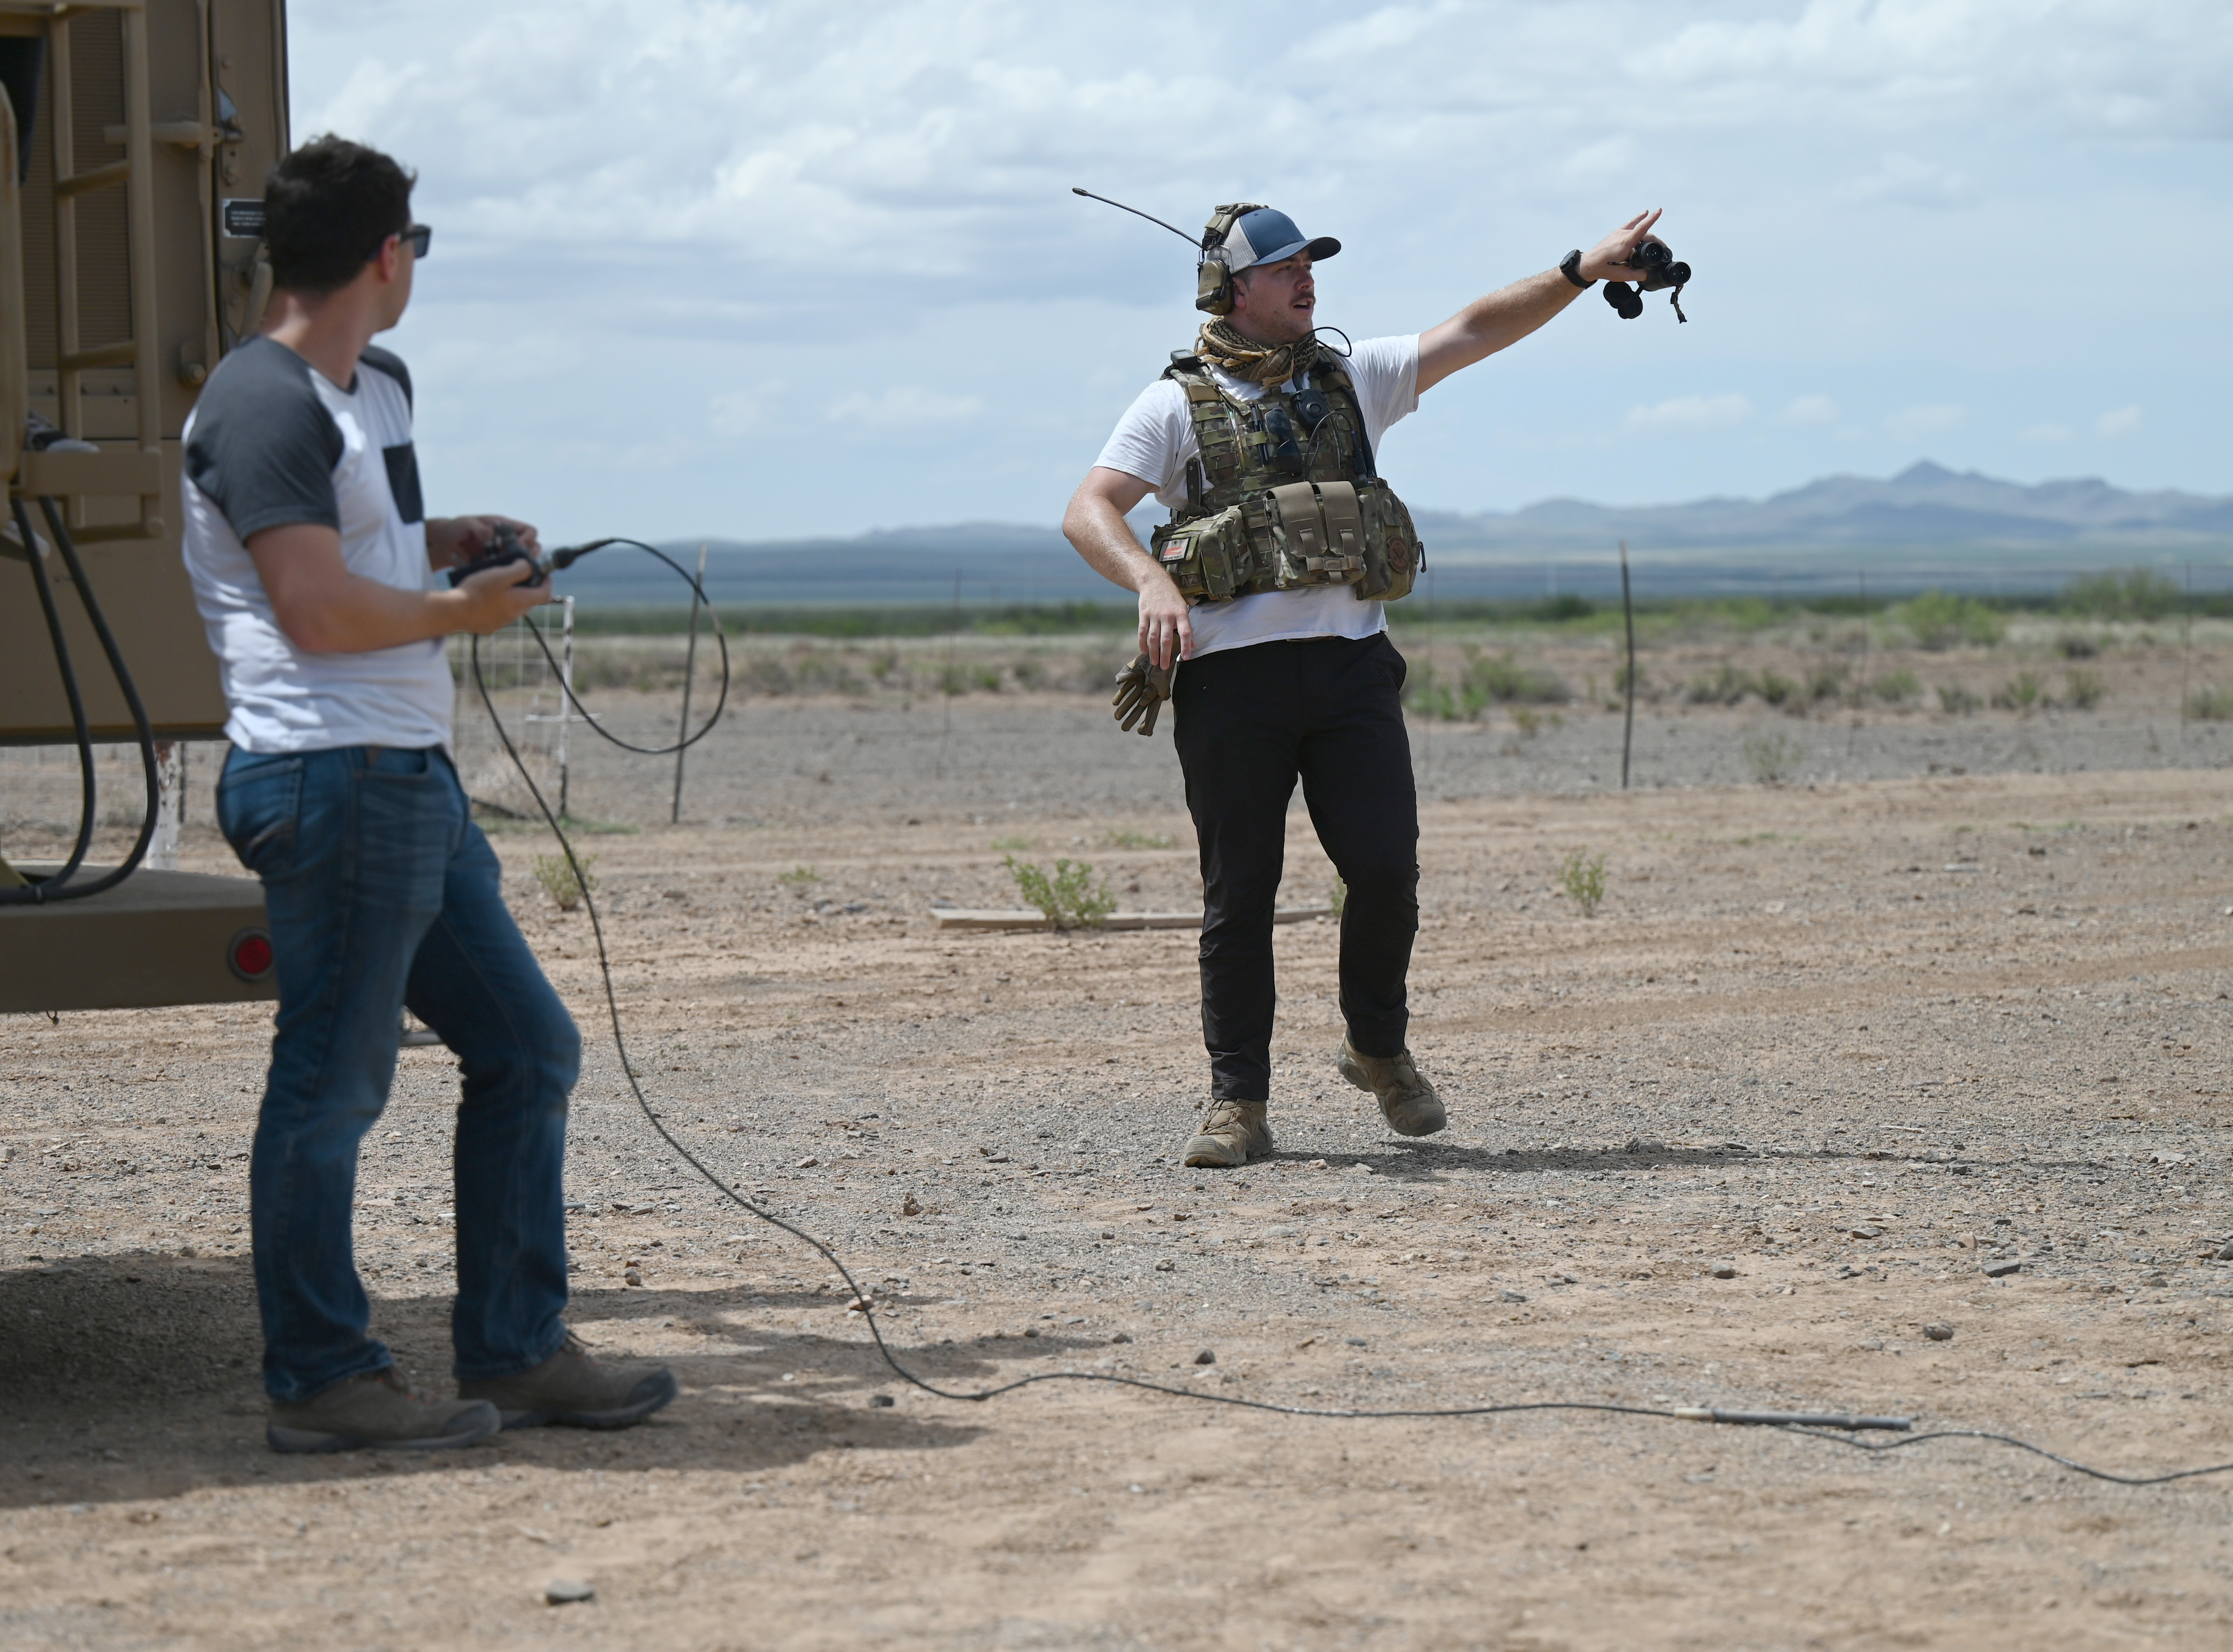 Image shows aviators using communication equipment and pointing in the desert.